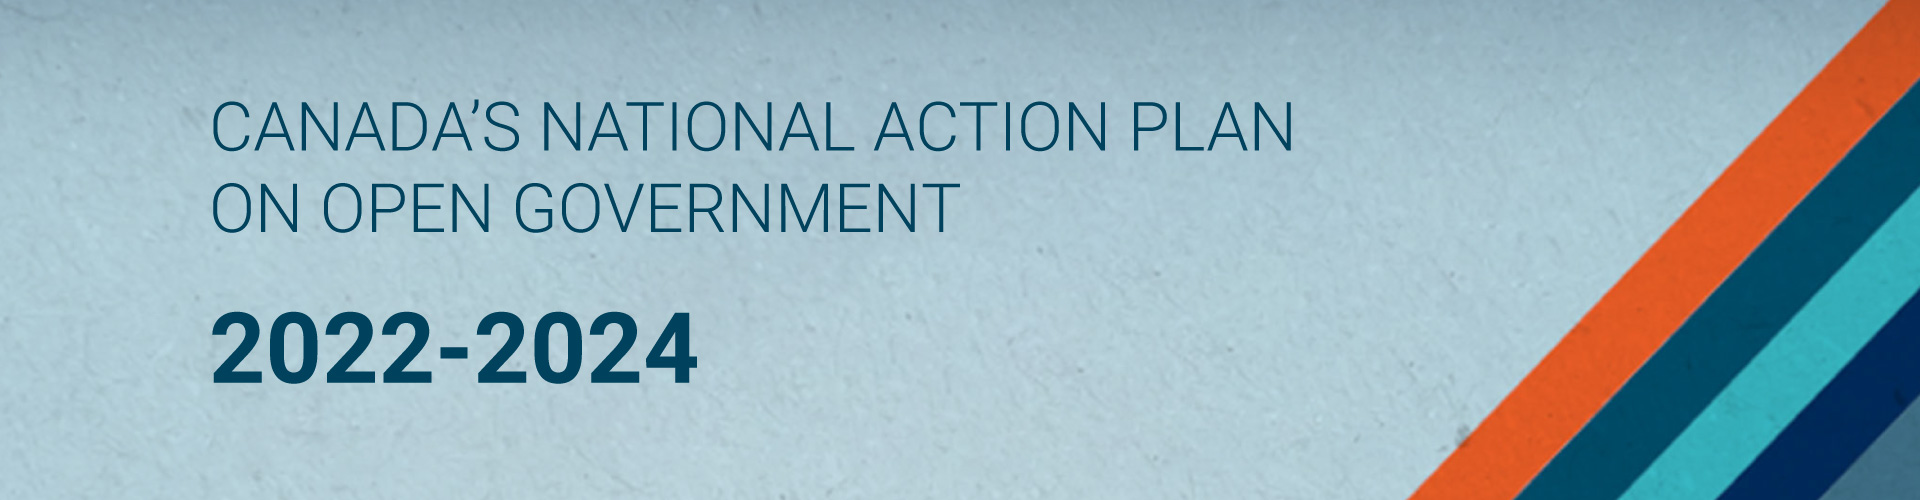 Canada's National Action Plan on Open Government 2022-2024